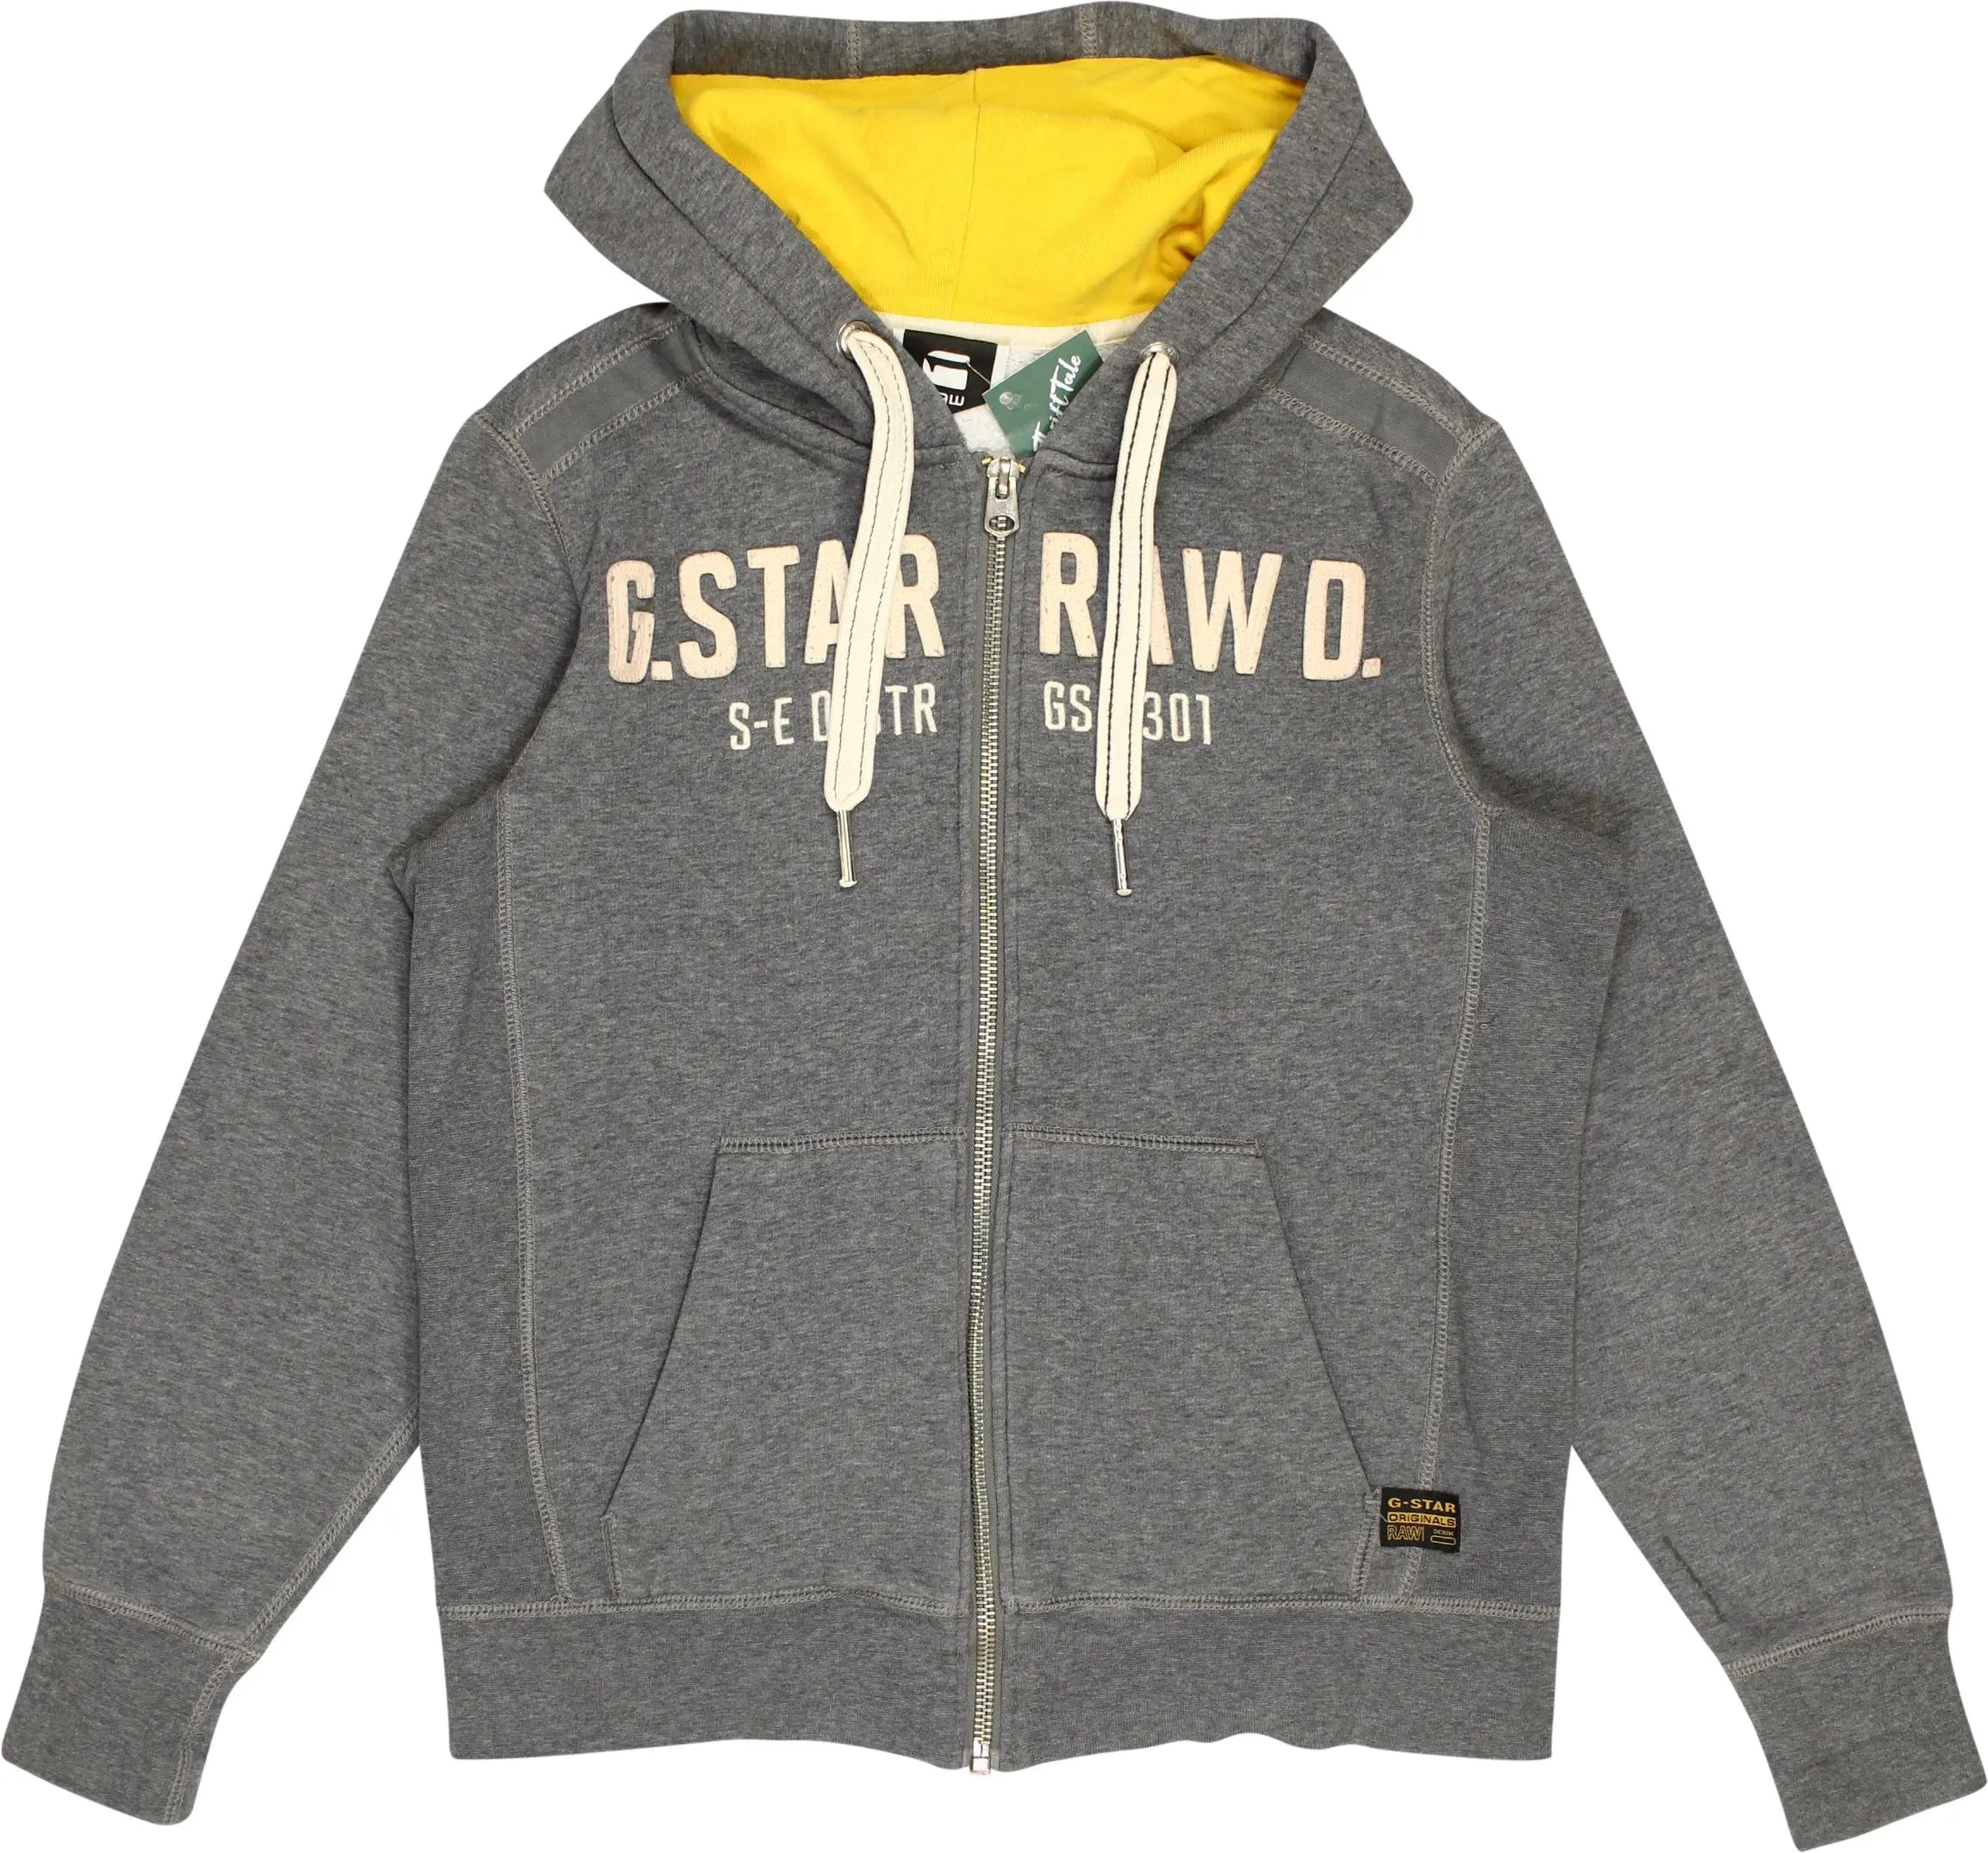 G-Star RAW - Grey Zip-up Hoodie by G-star RAW- ThriftTale.com - Vintage and second handclothing